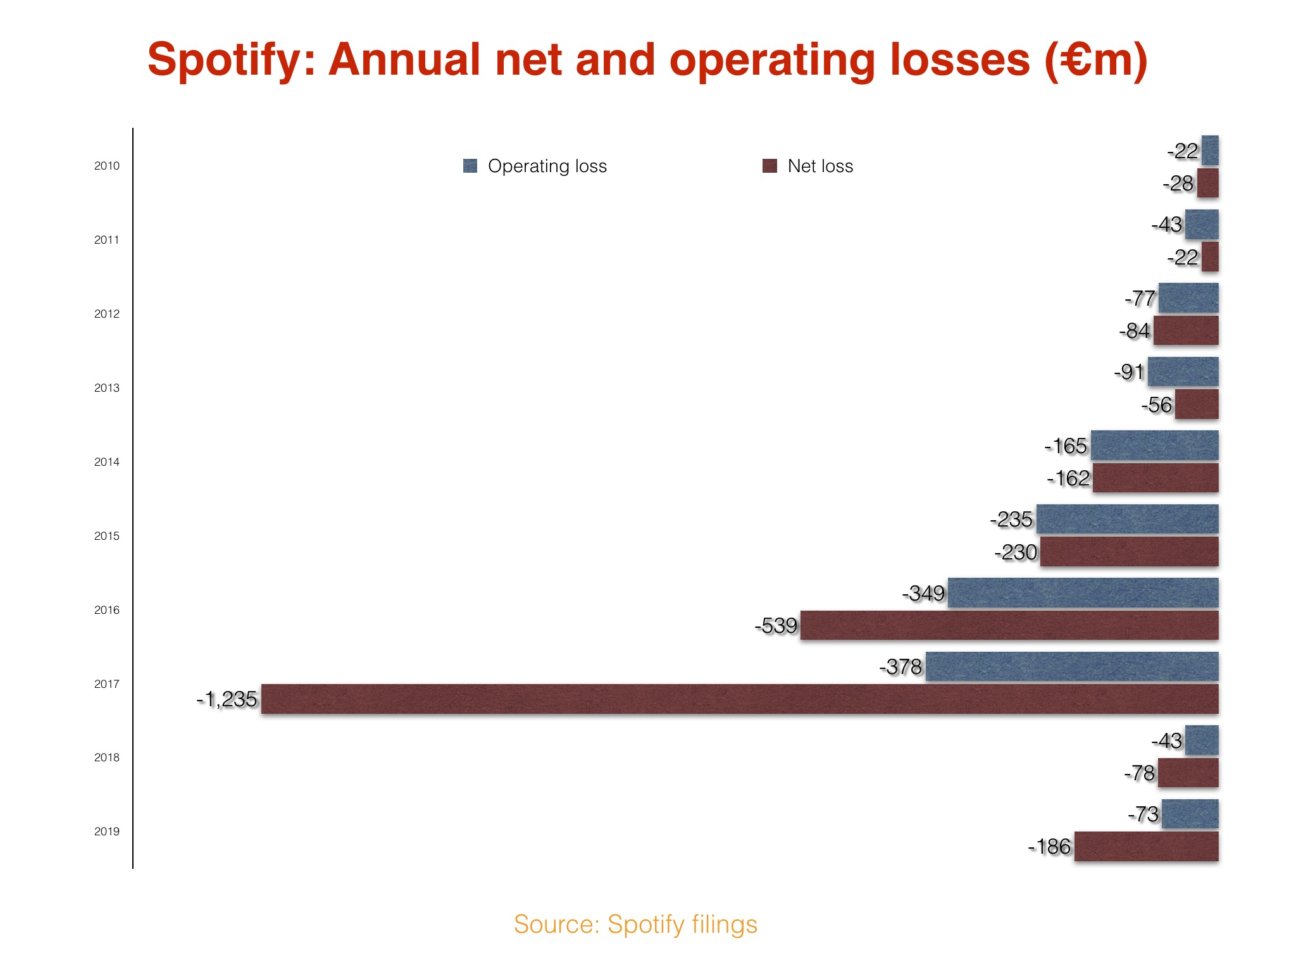 Lossmaking Spotify will continue to put growth ahead of profit for